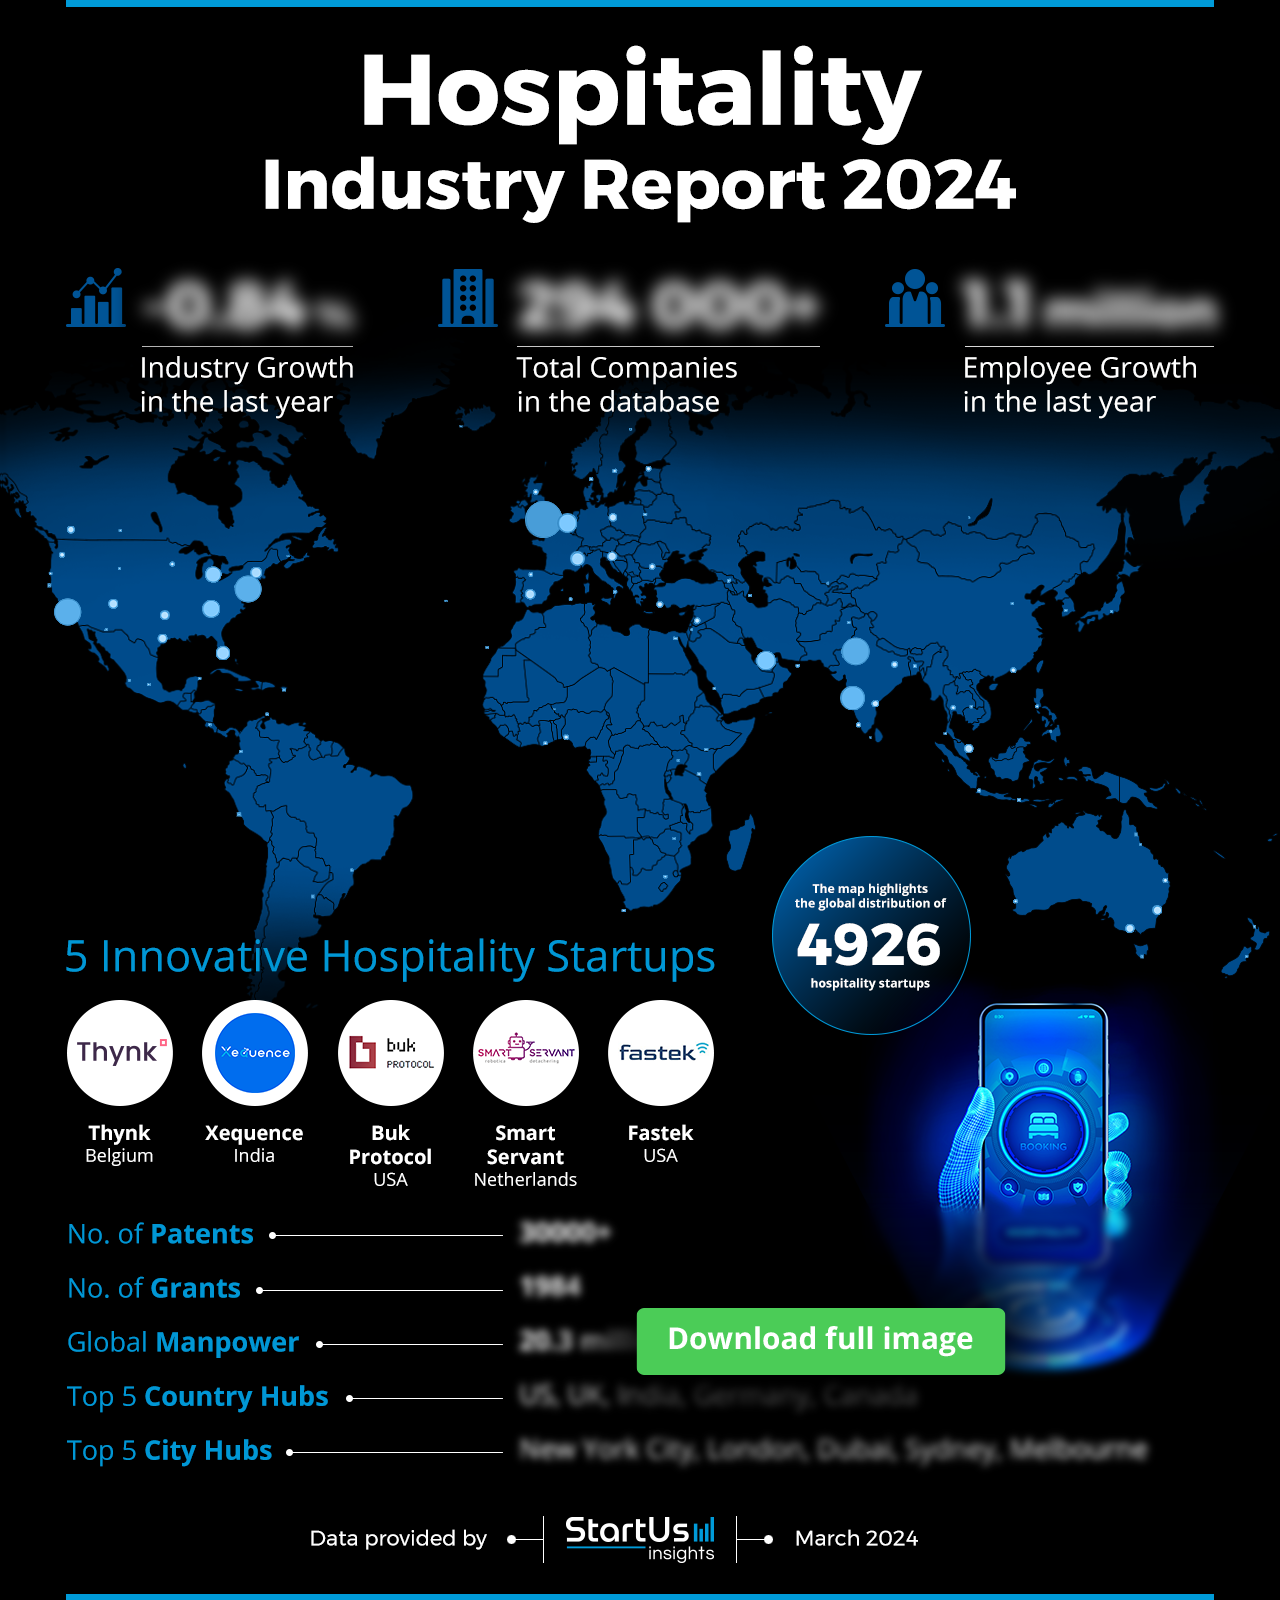 Hospitality-Industry-Report-HeatMap-Blurred-StartUs-Insights-noresize